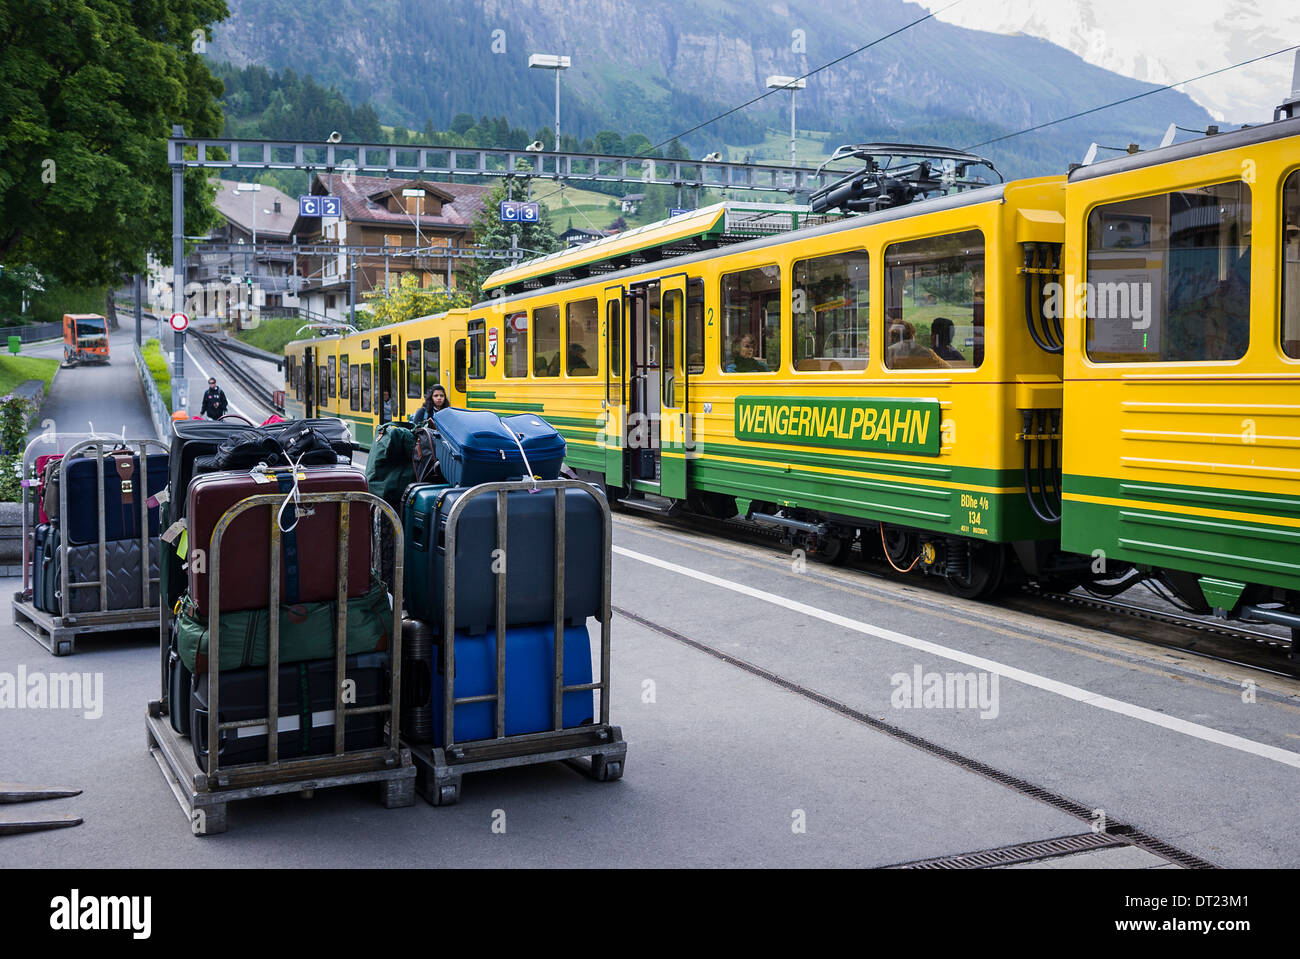 Wengen railway station showing incline up to the alpine peaks and trolley loads of tourist luggage waiting for the next train Stock Photo